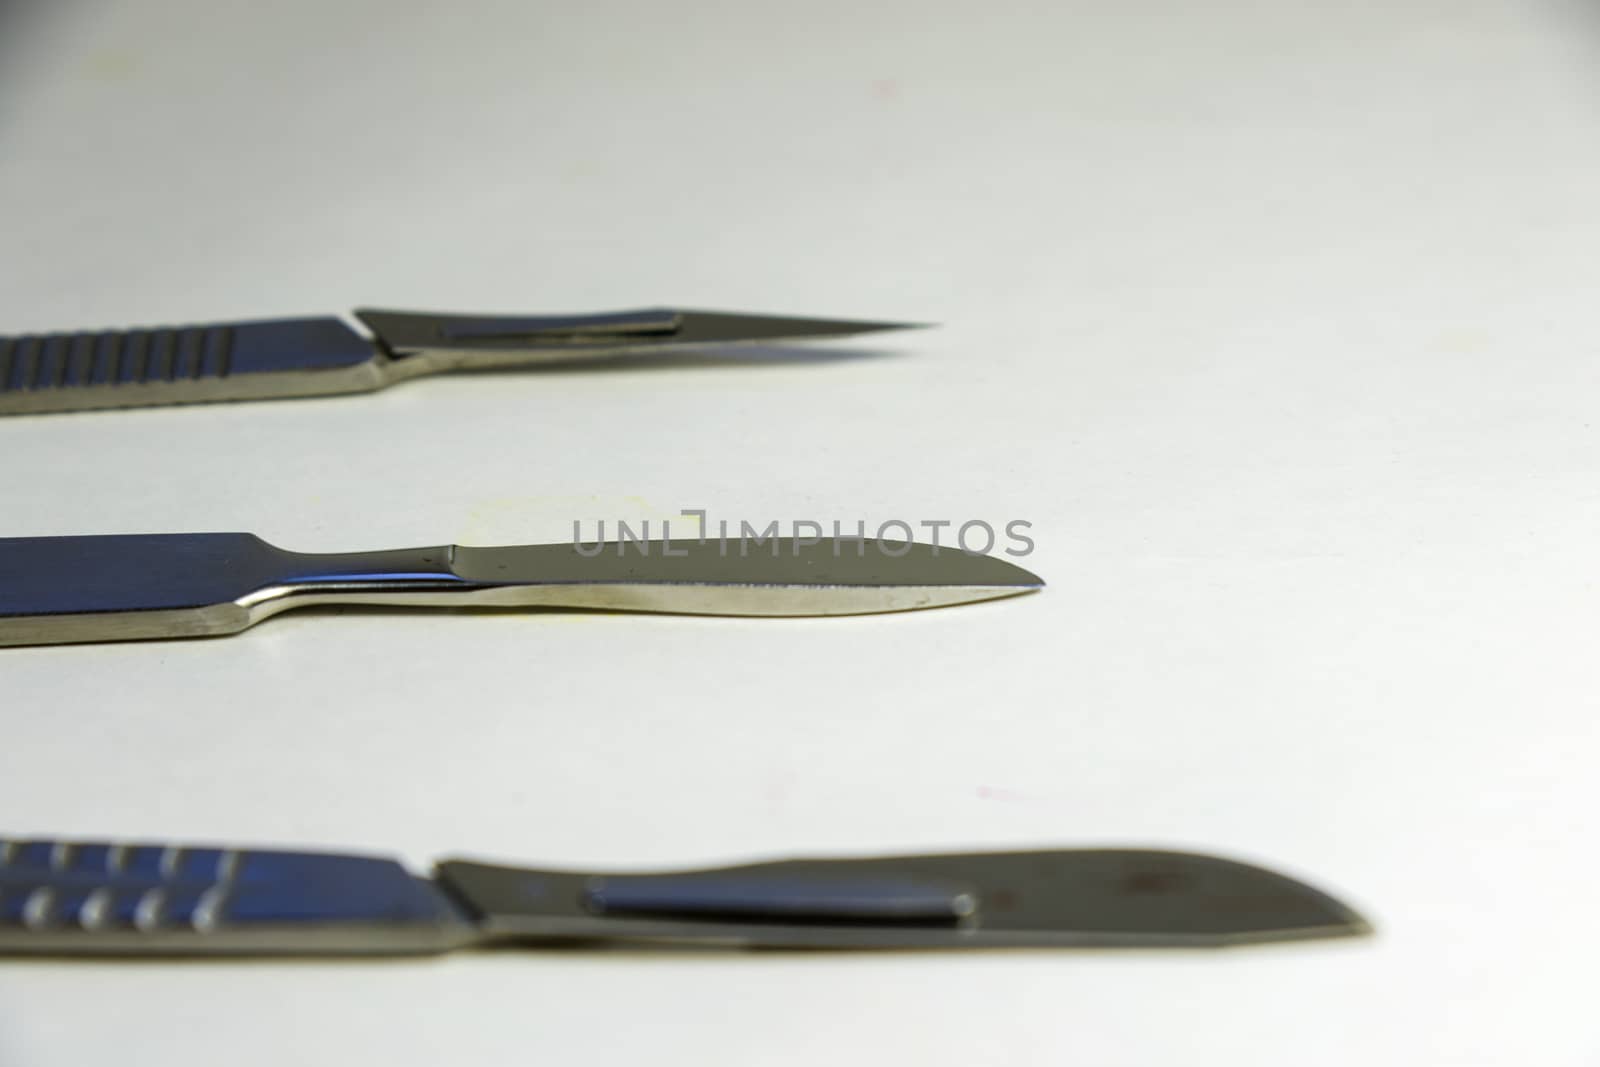 Dissection Kit - Surgery knife. Premium Quality Stainless Steel Tools for Medical Students of Anatomy. by Taidundua